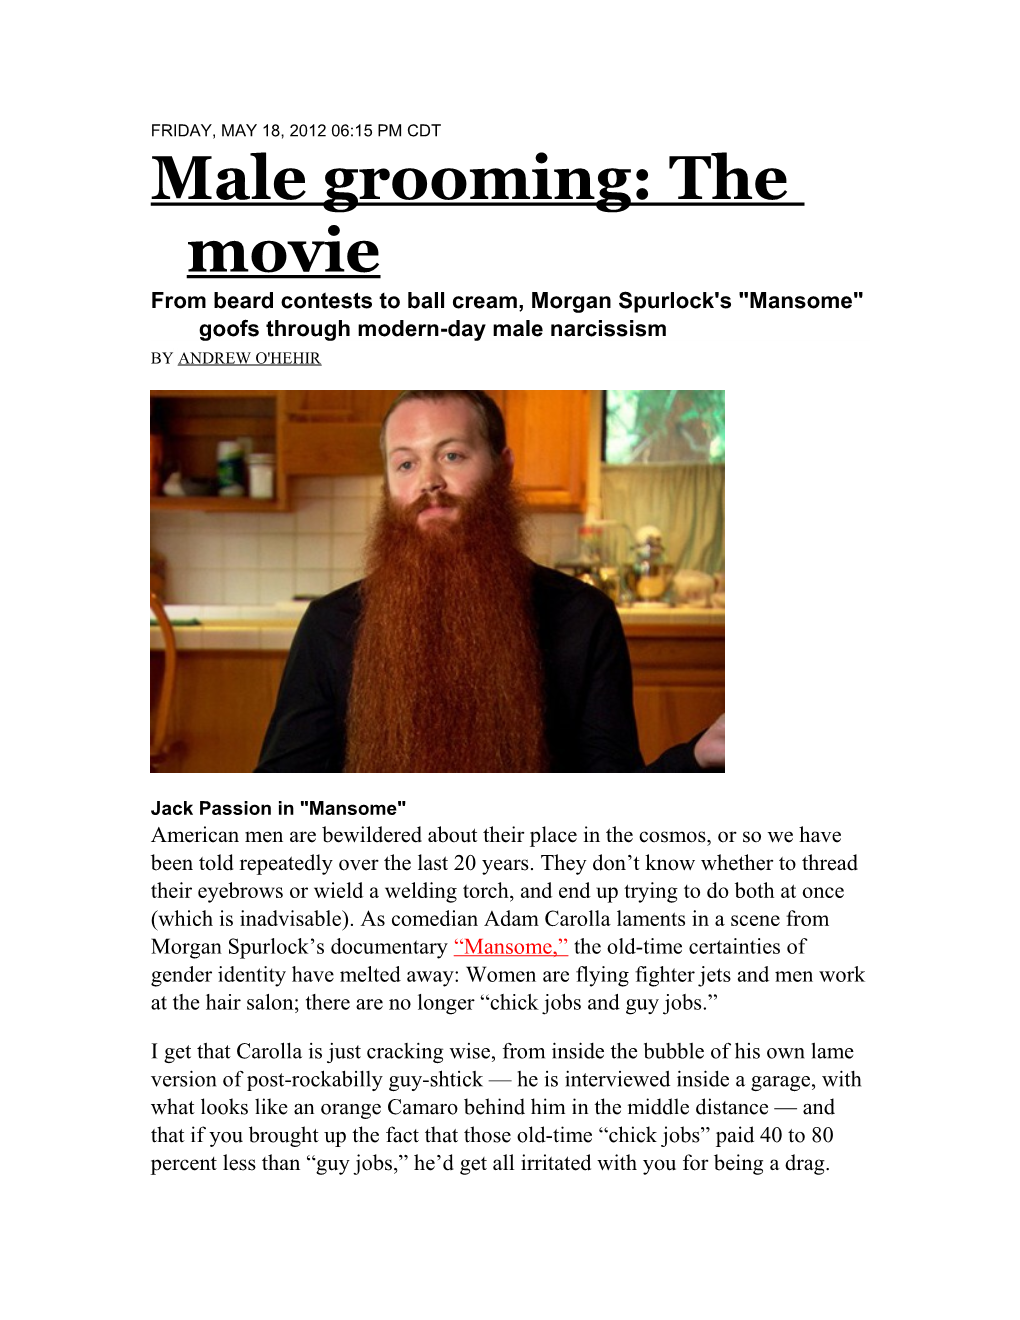 Male Grooming: the Movie